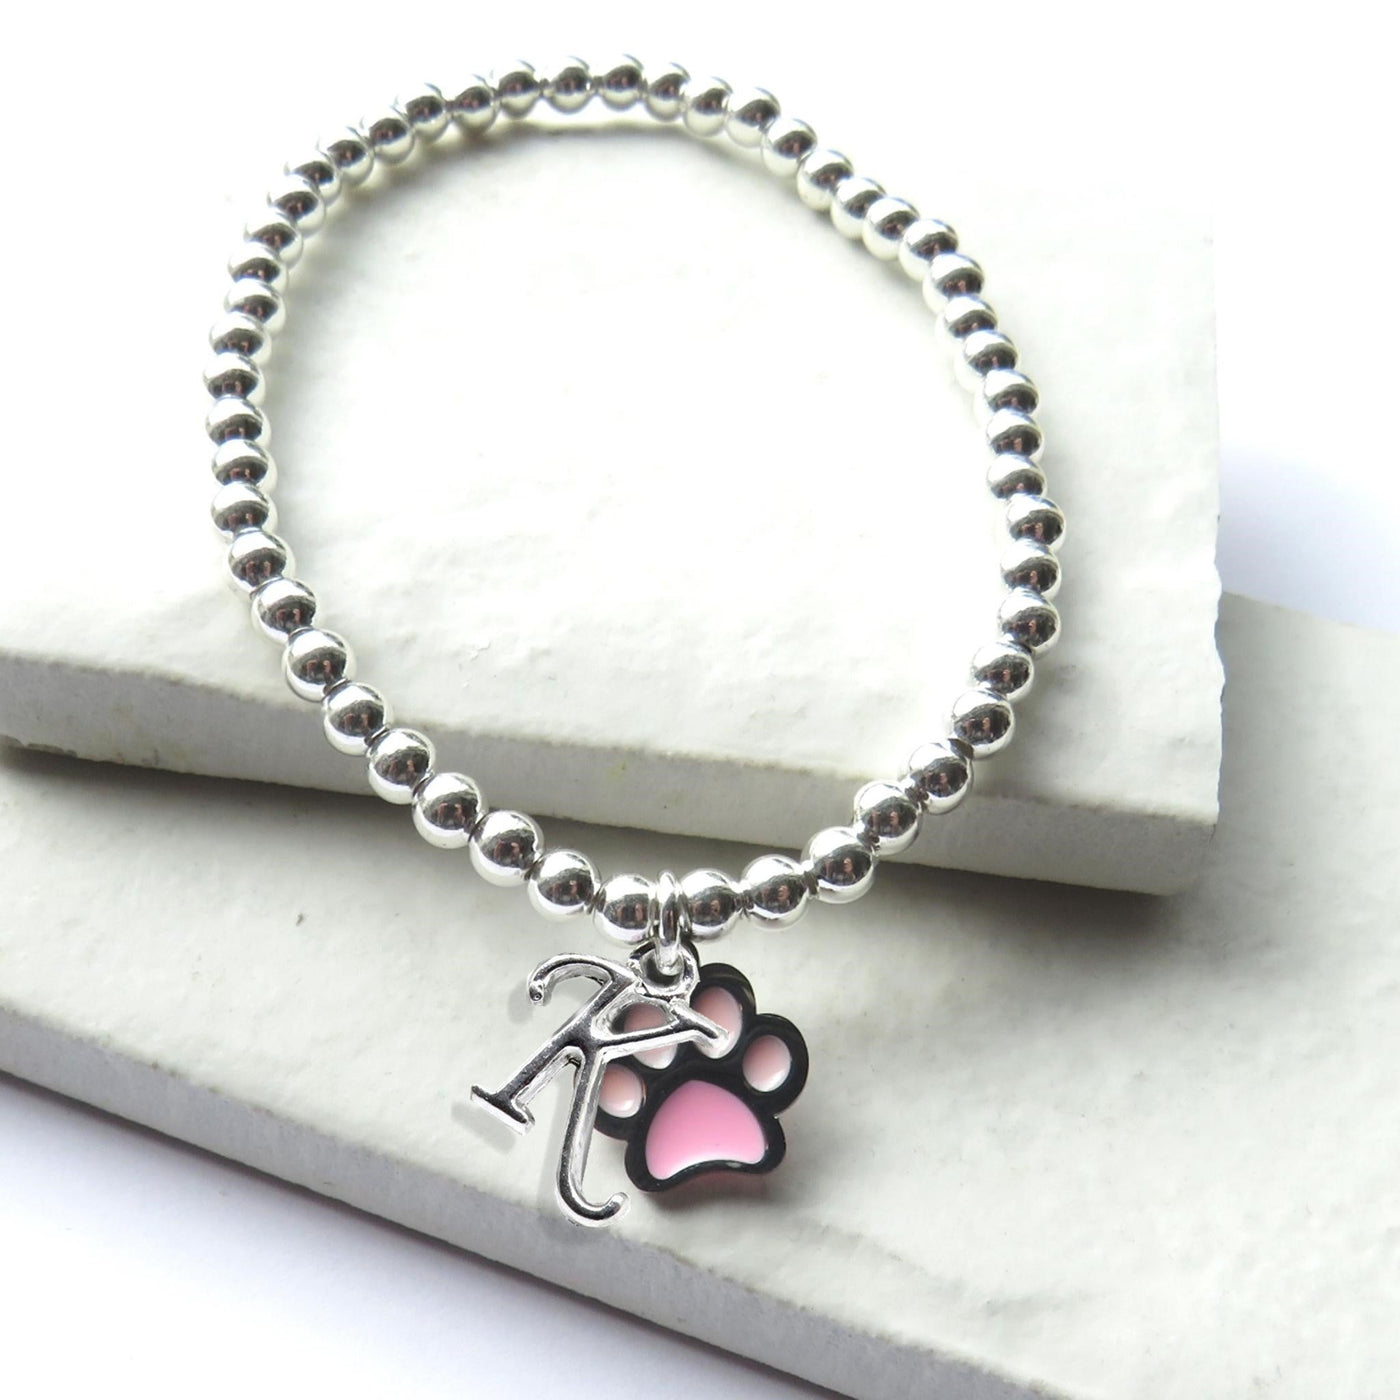 Personalised Initial Girls Pink Paw Shaped Charm Bracelet